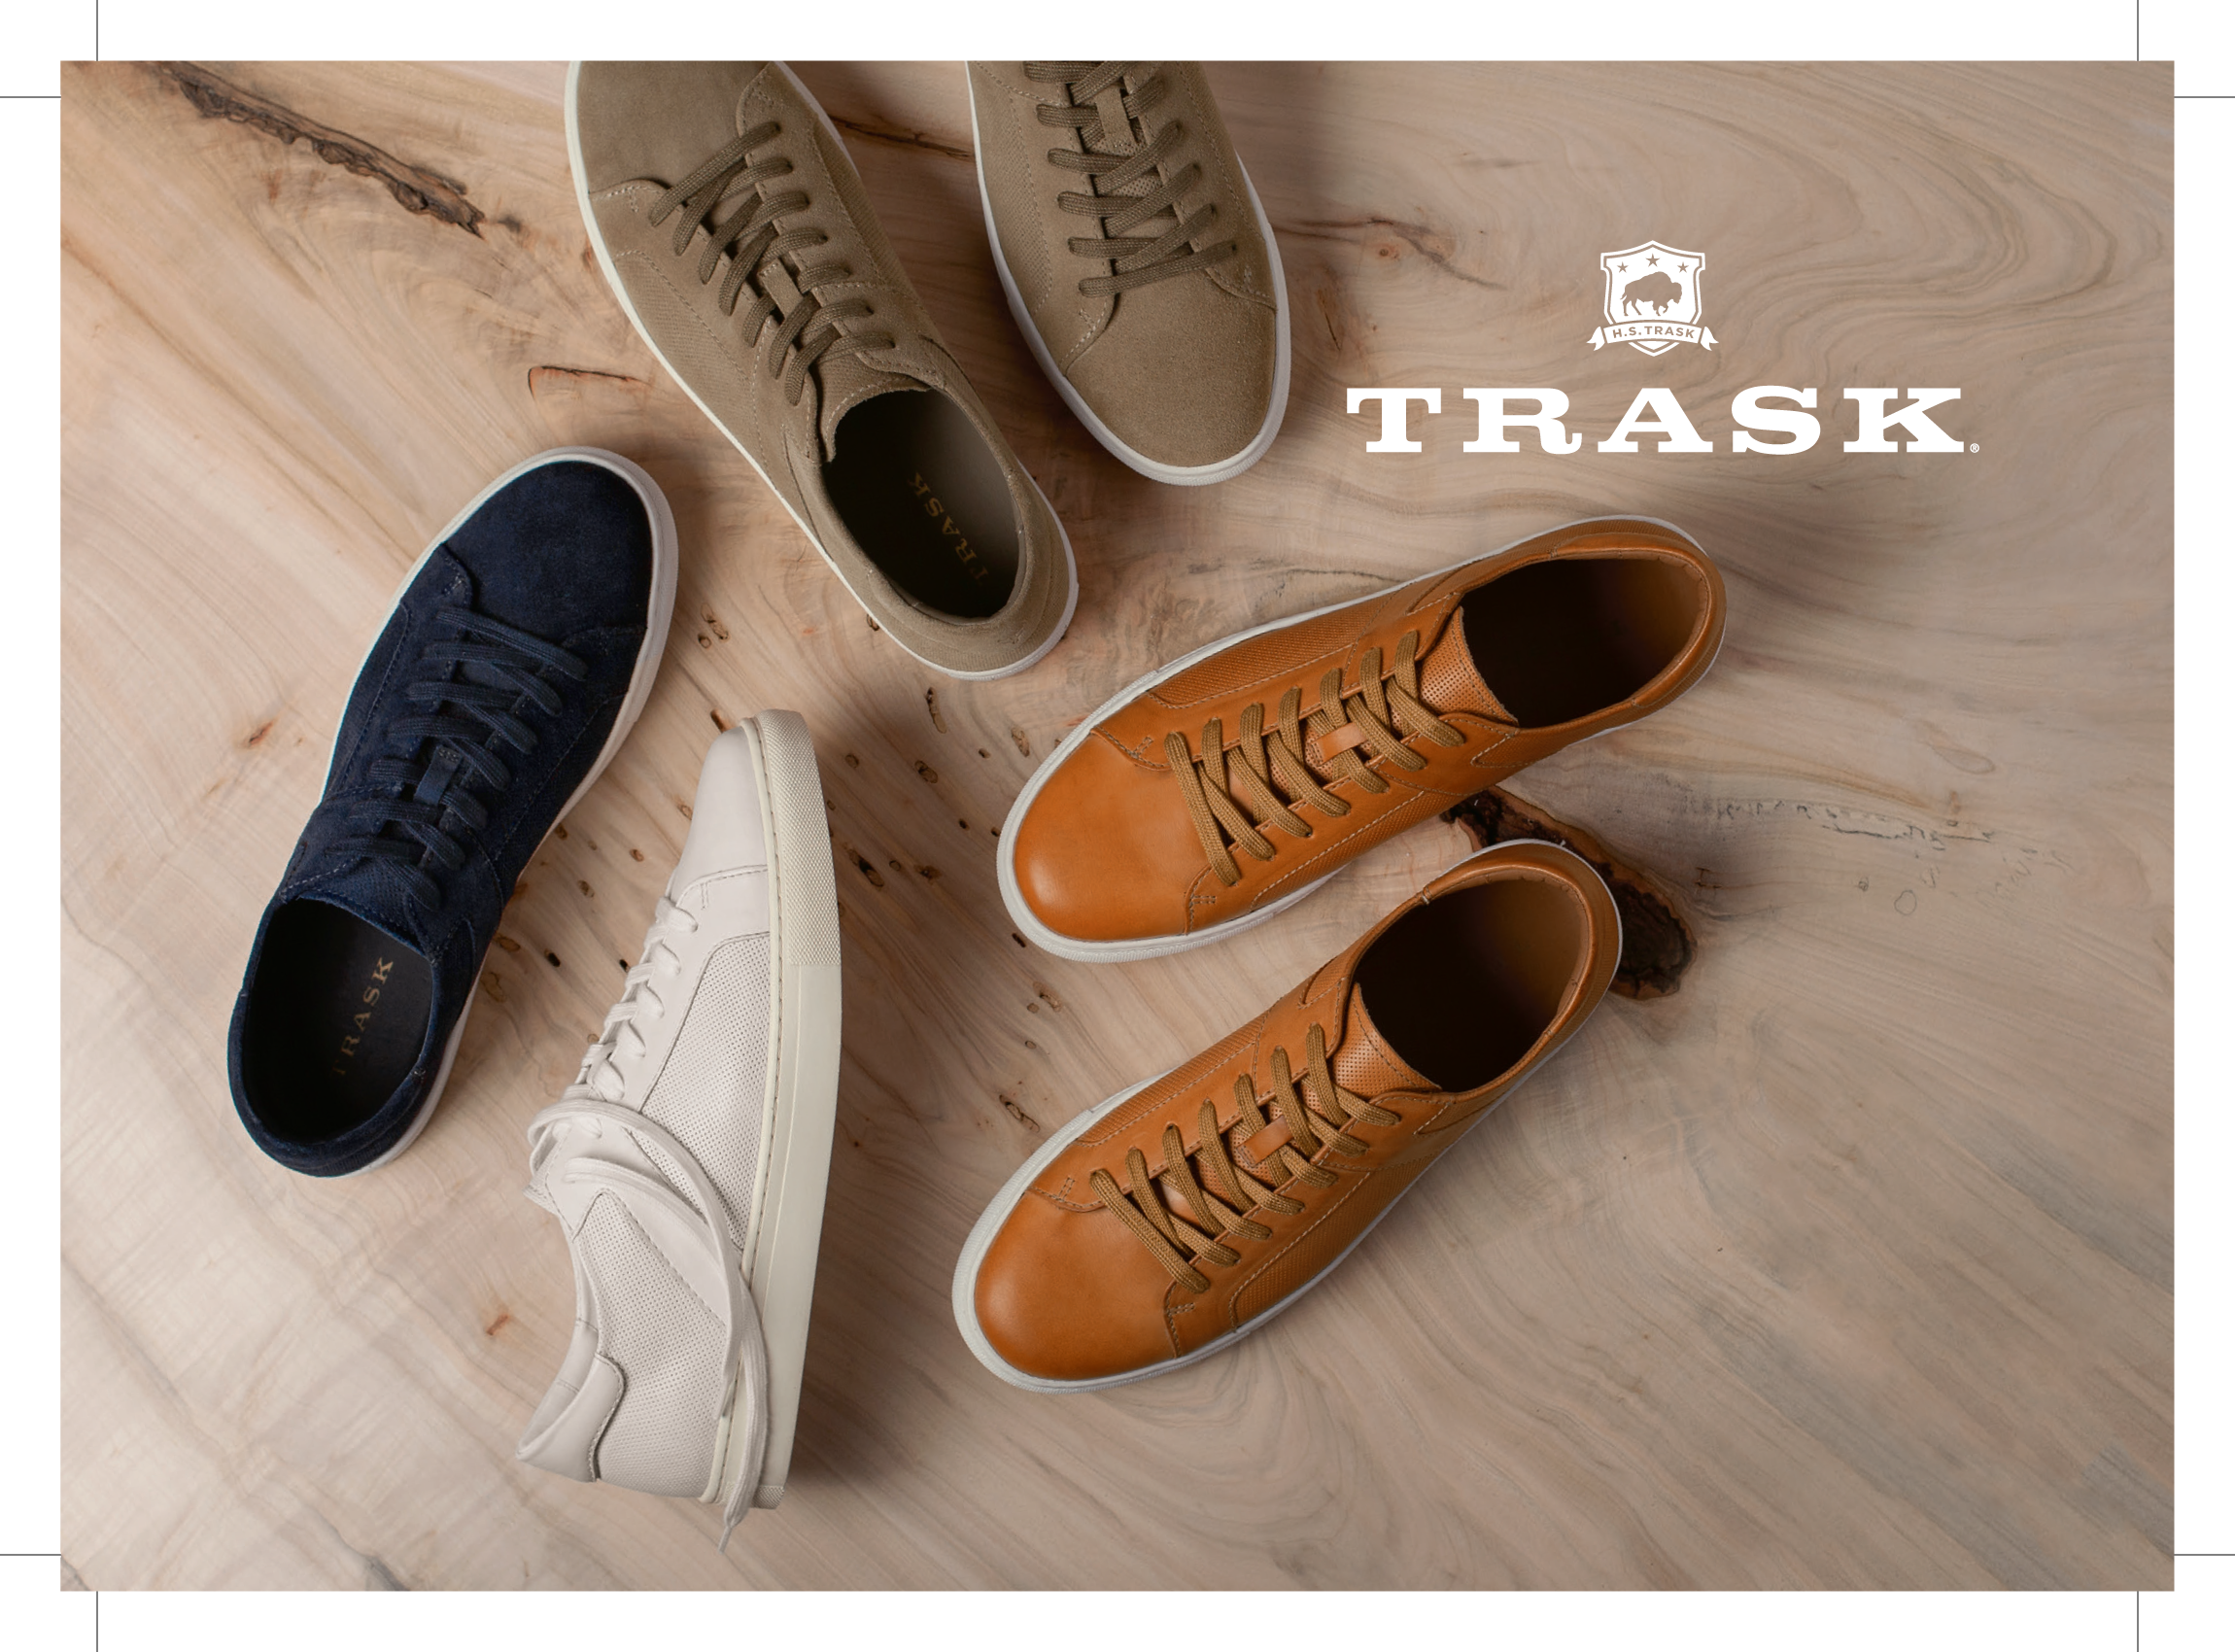 trask shoes on sale